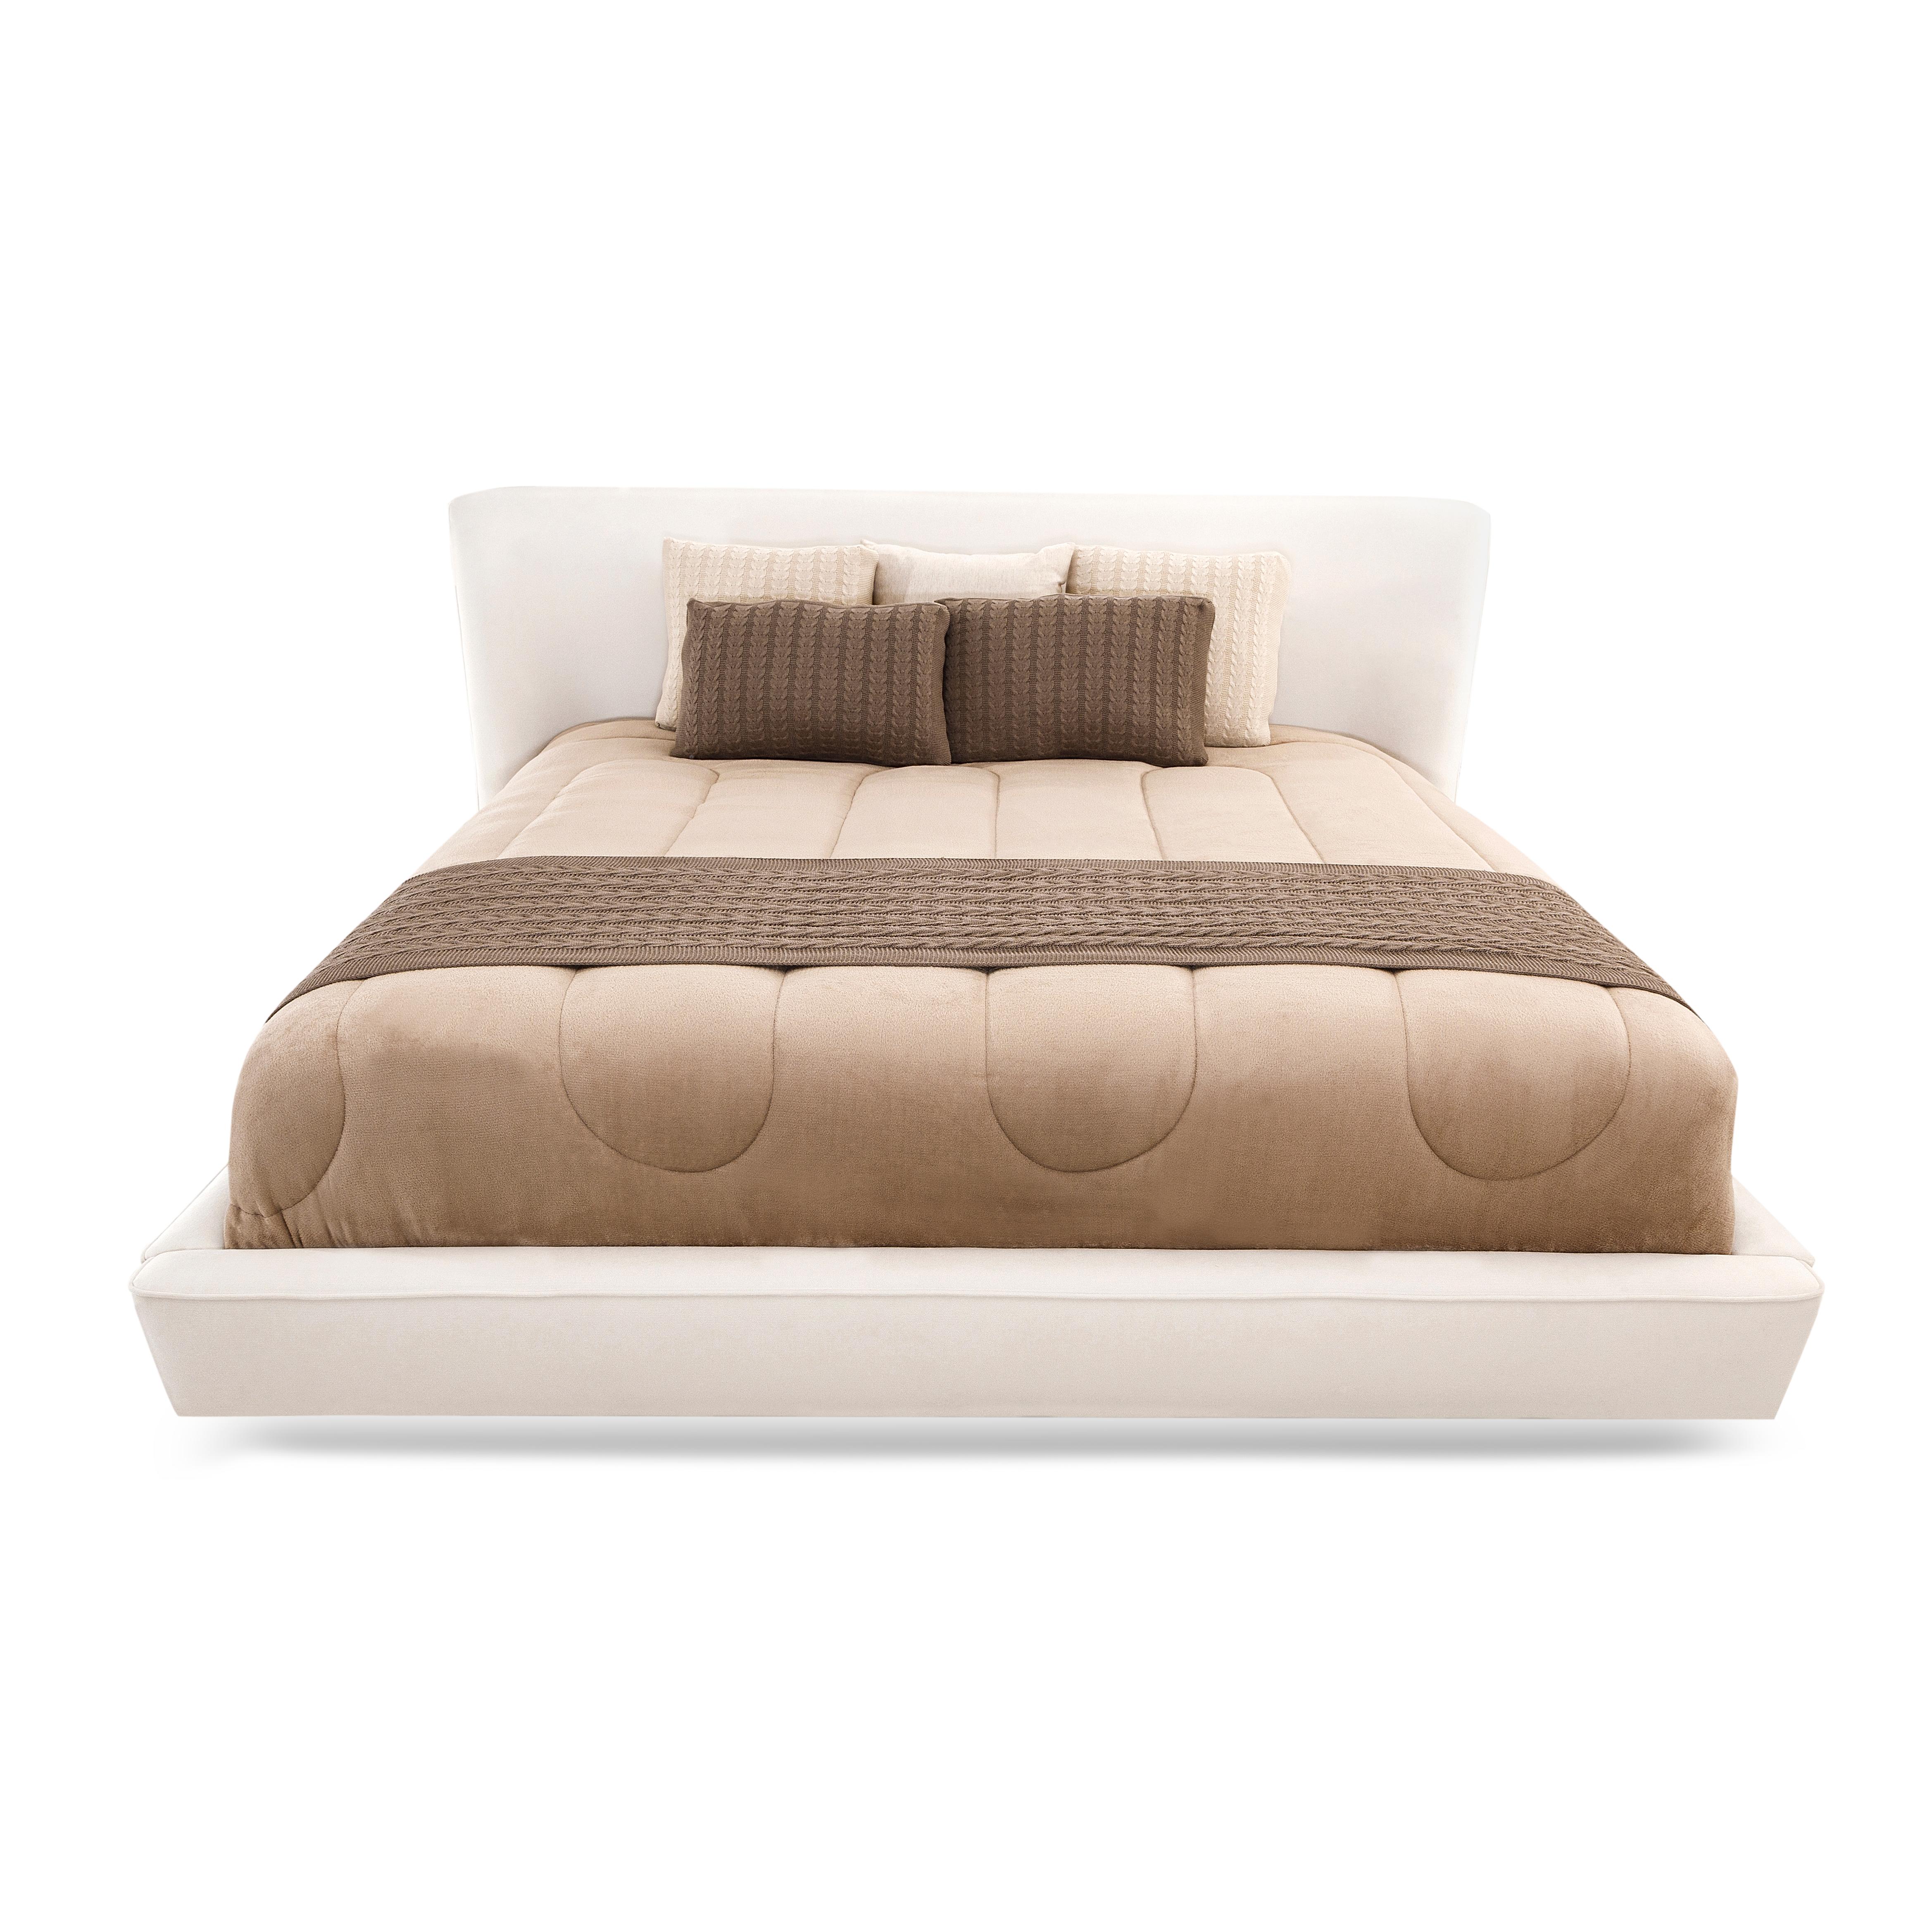 Brazilian Musa King Bed in a Light Beige Fabric For Sale